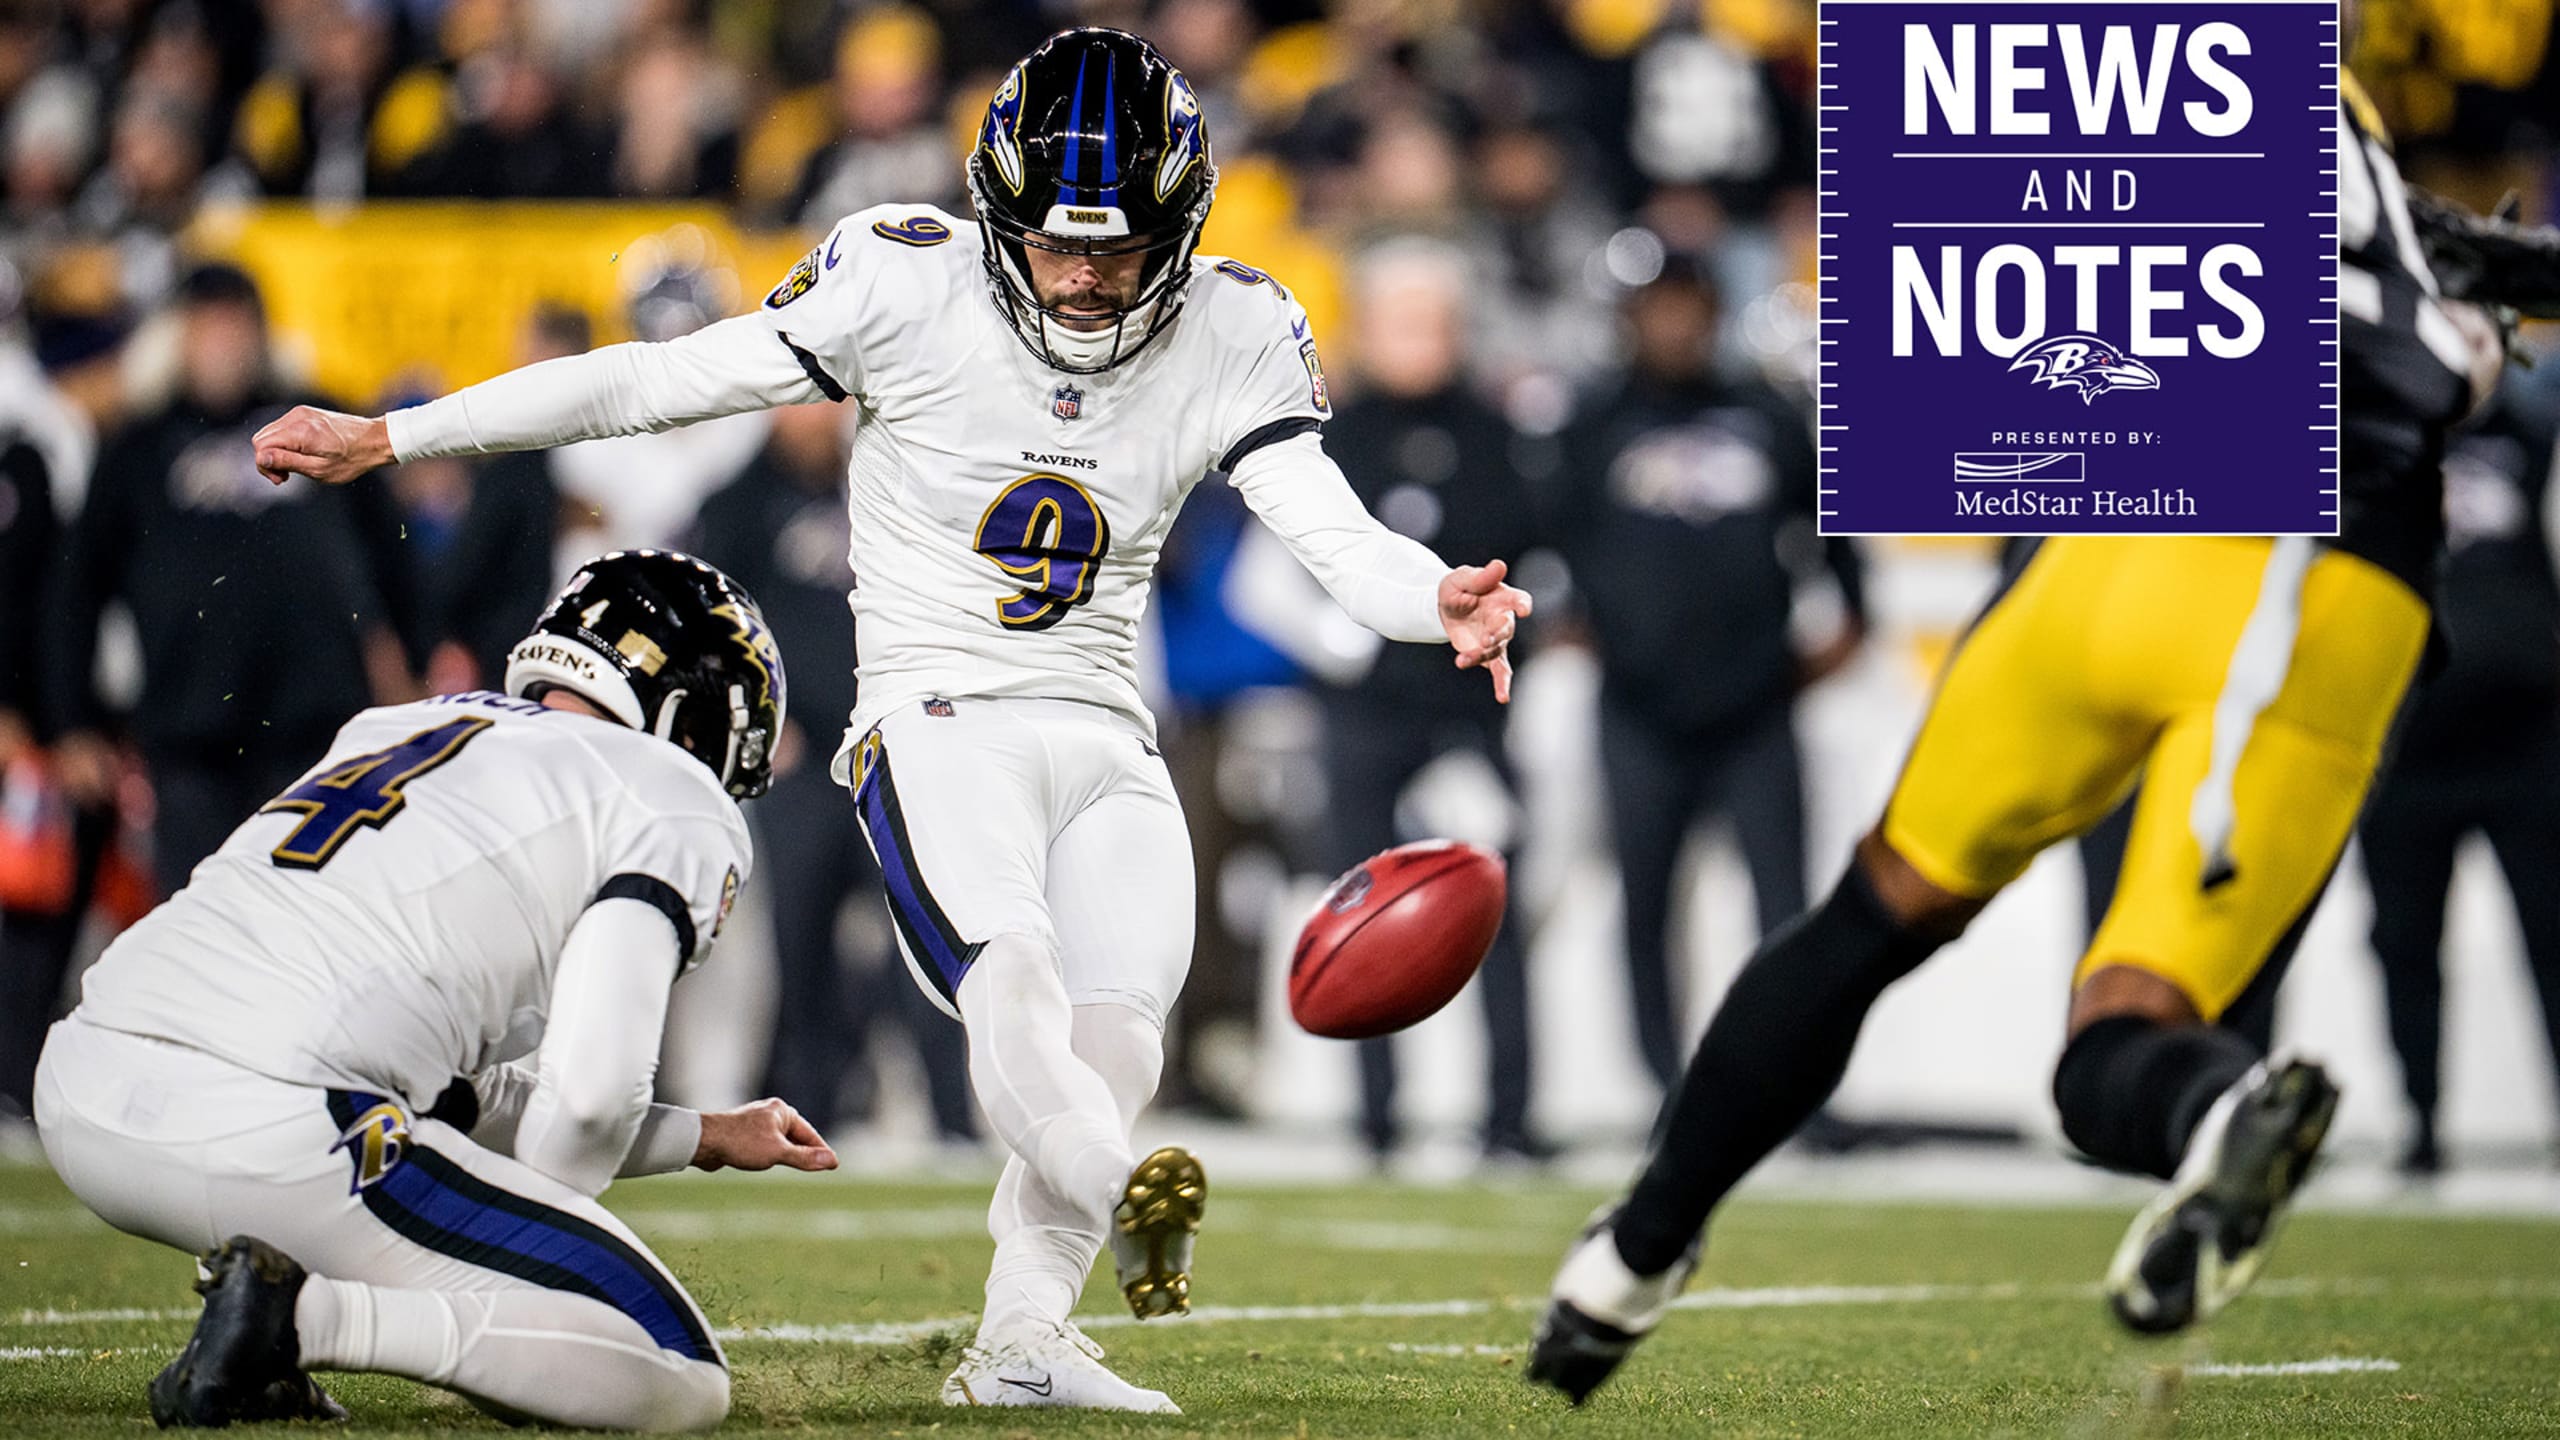 Justin Tucker Is on the Cusp of Ravens’ Scoring Record